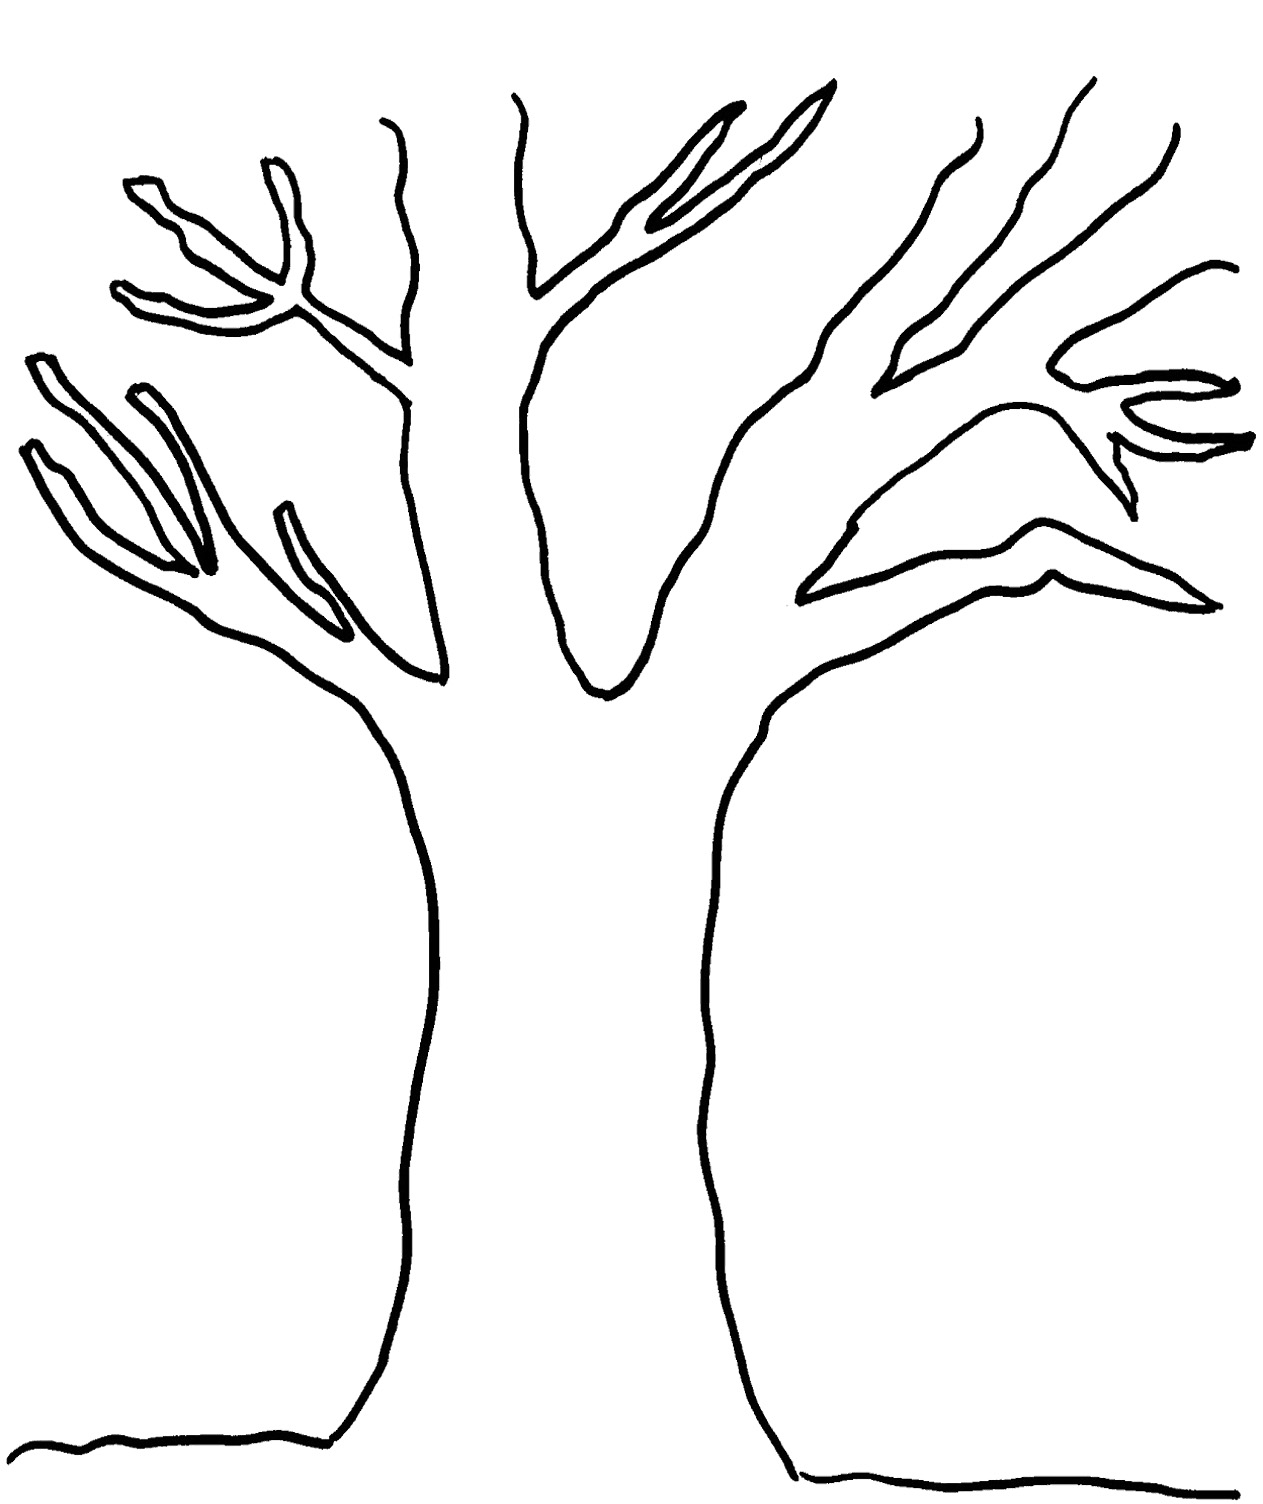 Free Leafless Tree Outline Printable, Download Free Clip Art